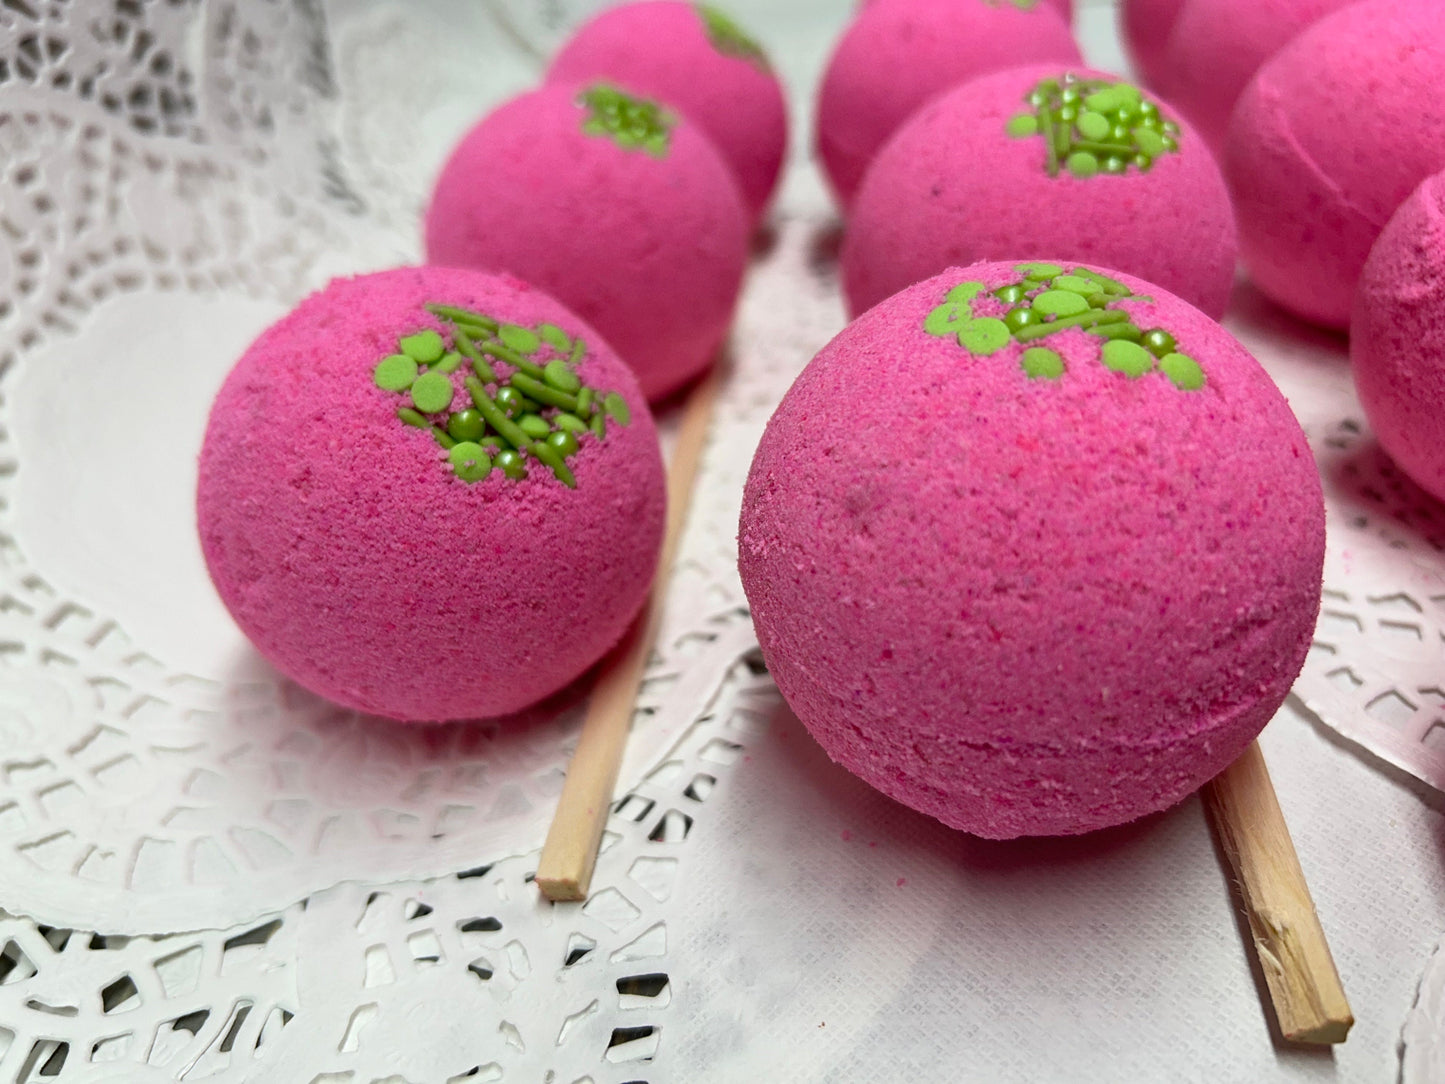 Bath Bomb - Fresh Cut Roses Scented Bath Bombs with Embeds and Candy sprinkled